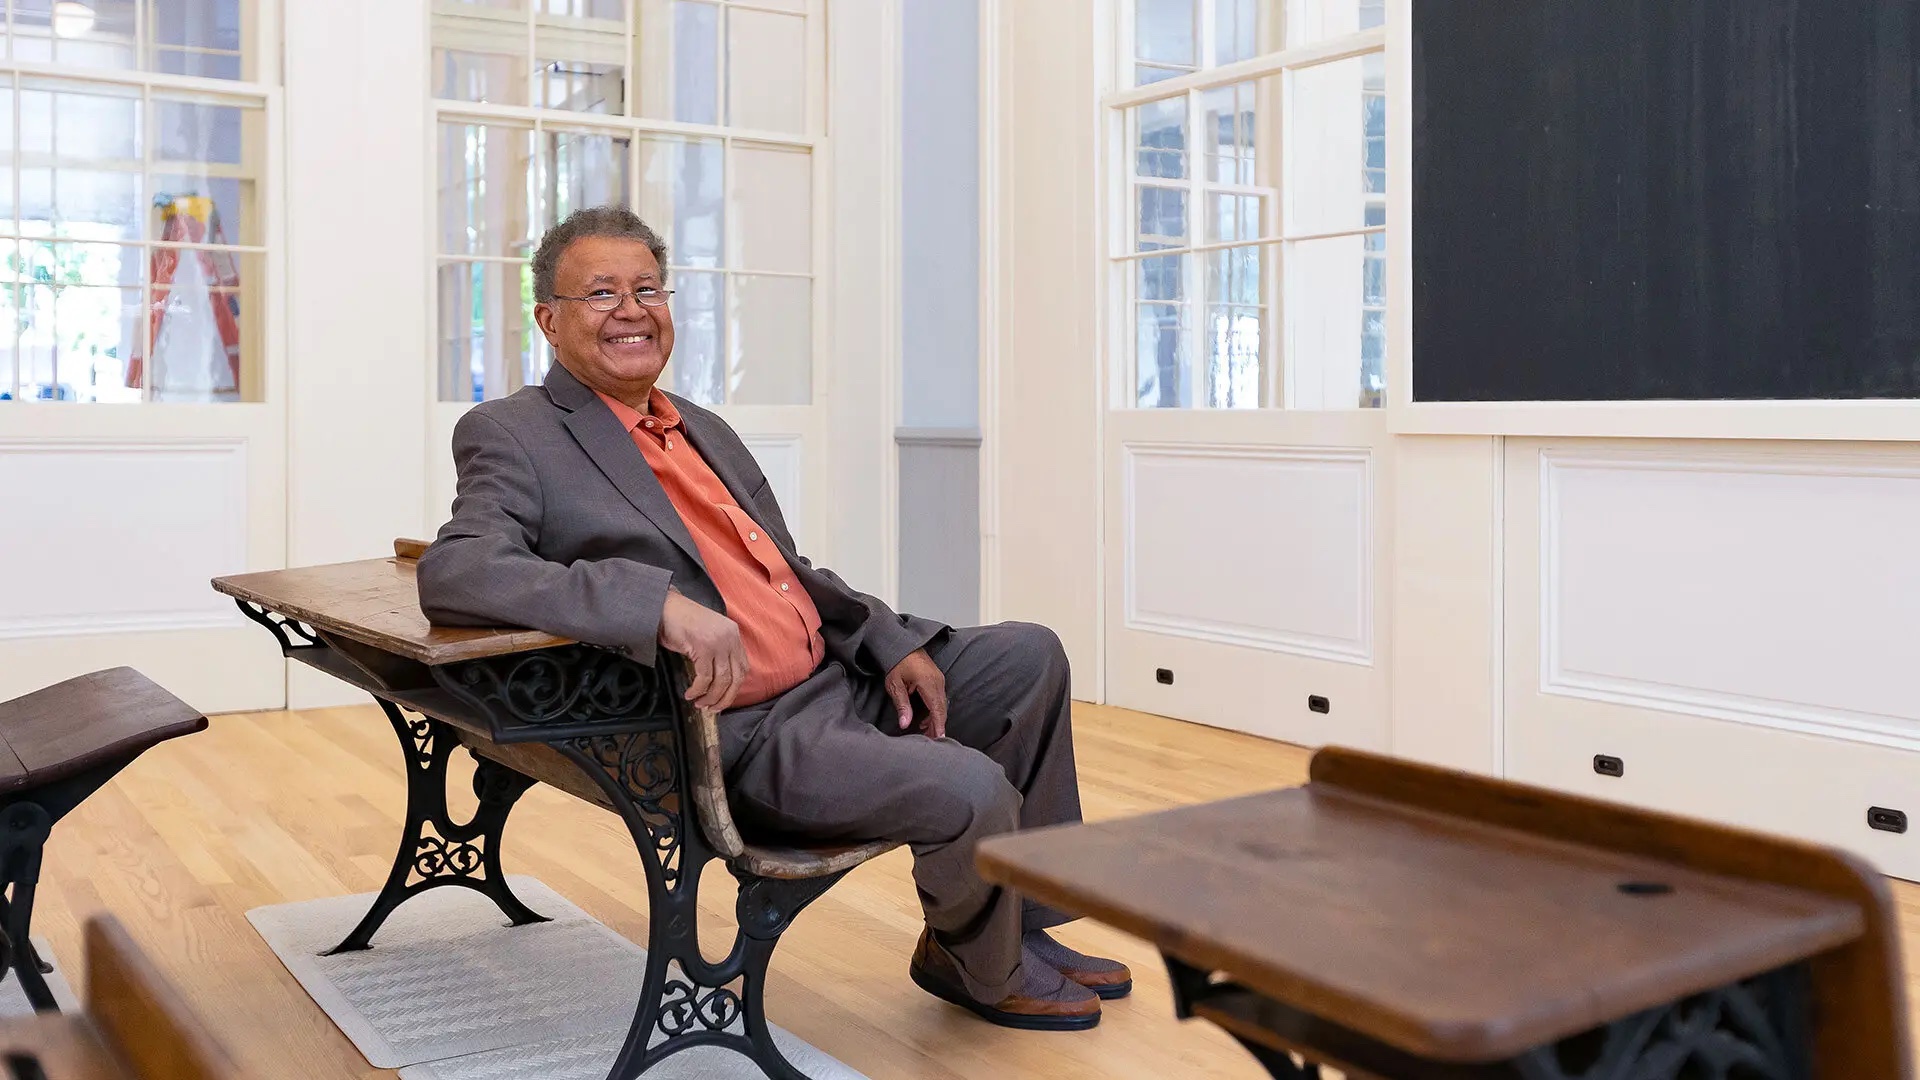 Retired U.S. District Court Judge Alexander Williams, director of the UMD center that bears his name, sits in a restored classroom at the new Thurgood Marshall Amenity Center in West Baltimore. It is housed in historic P.S. 103, where the late U.S. Supreme Court justice attended elementary school. Photo by Riley Sims Ph.D. ’23